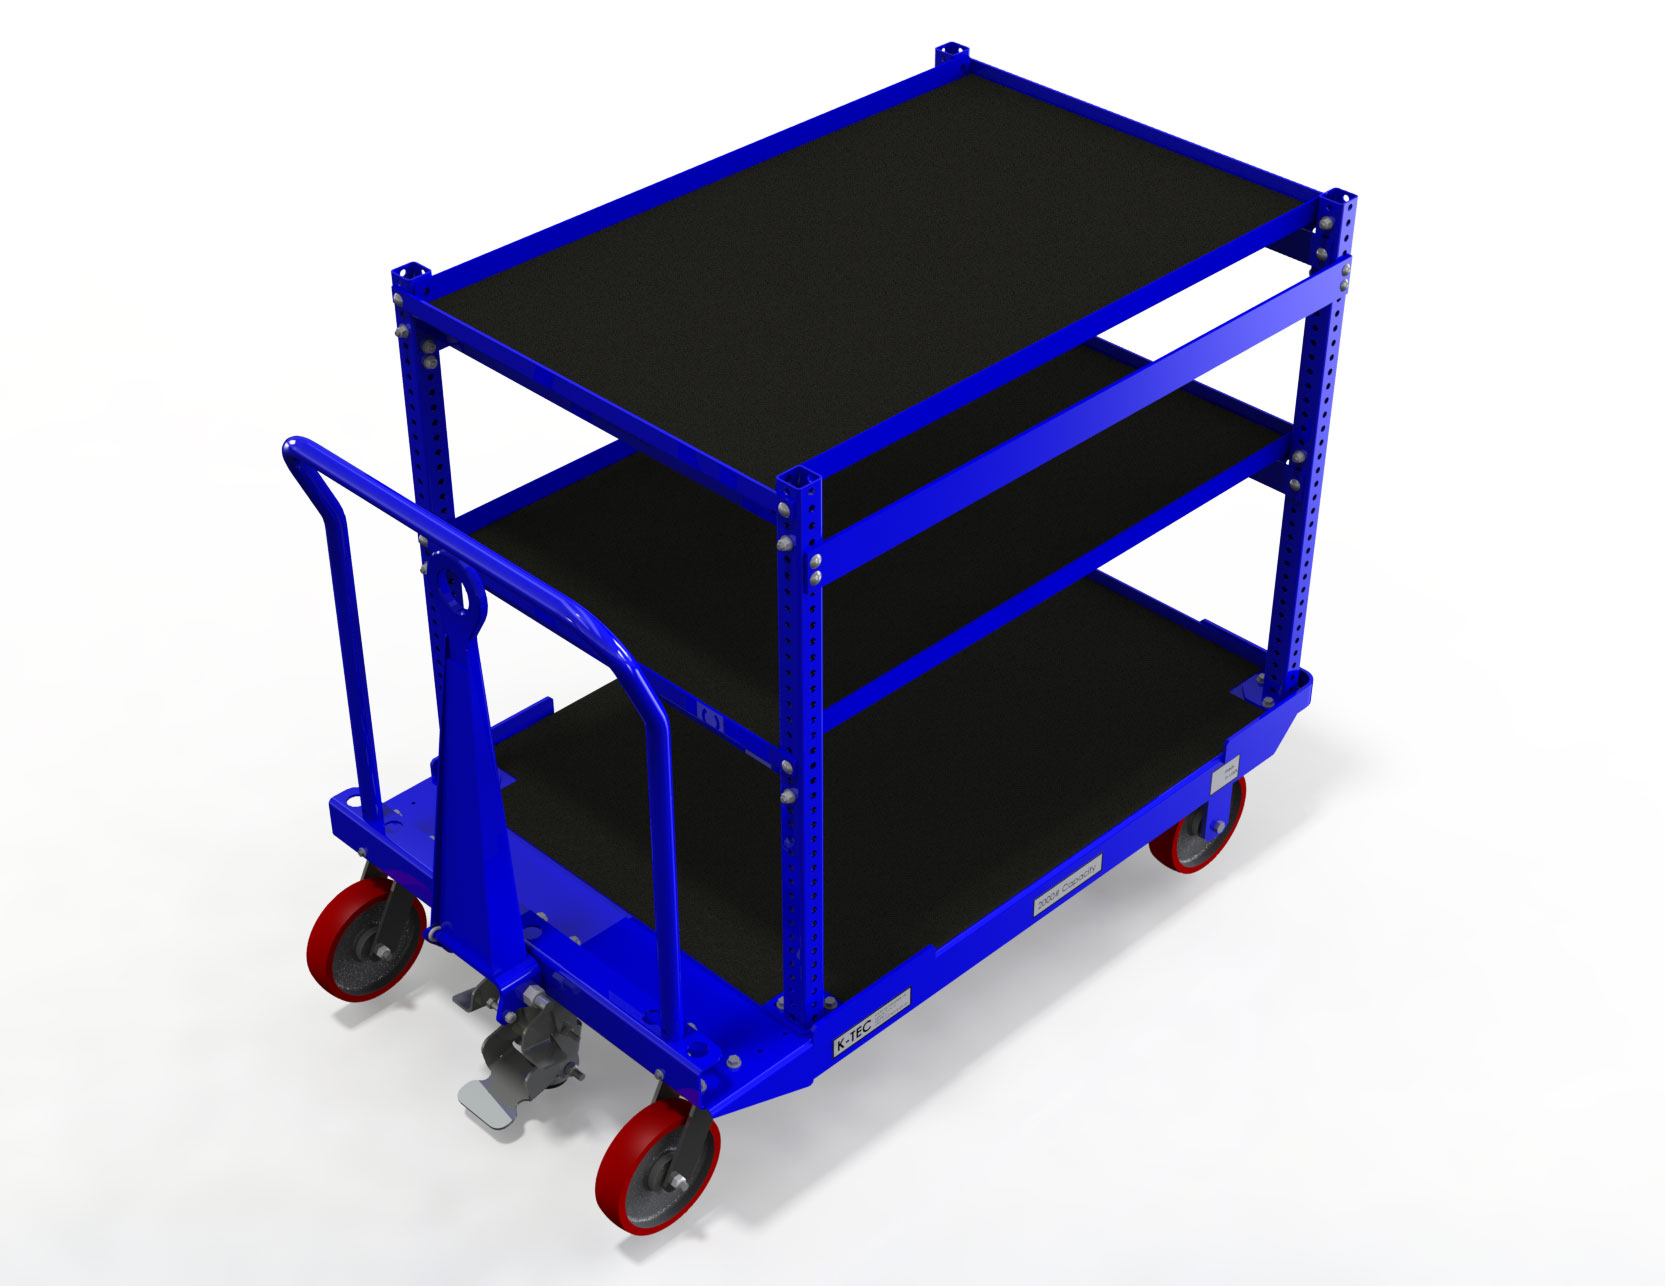 A blue and black color cart with some wheels